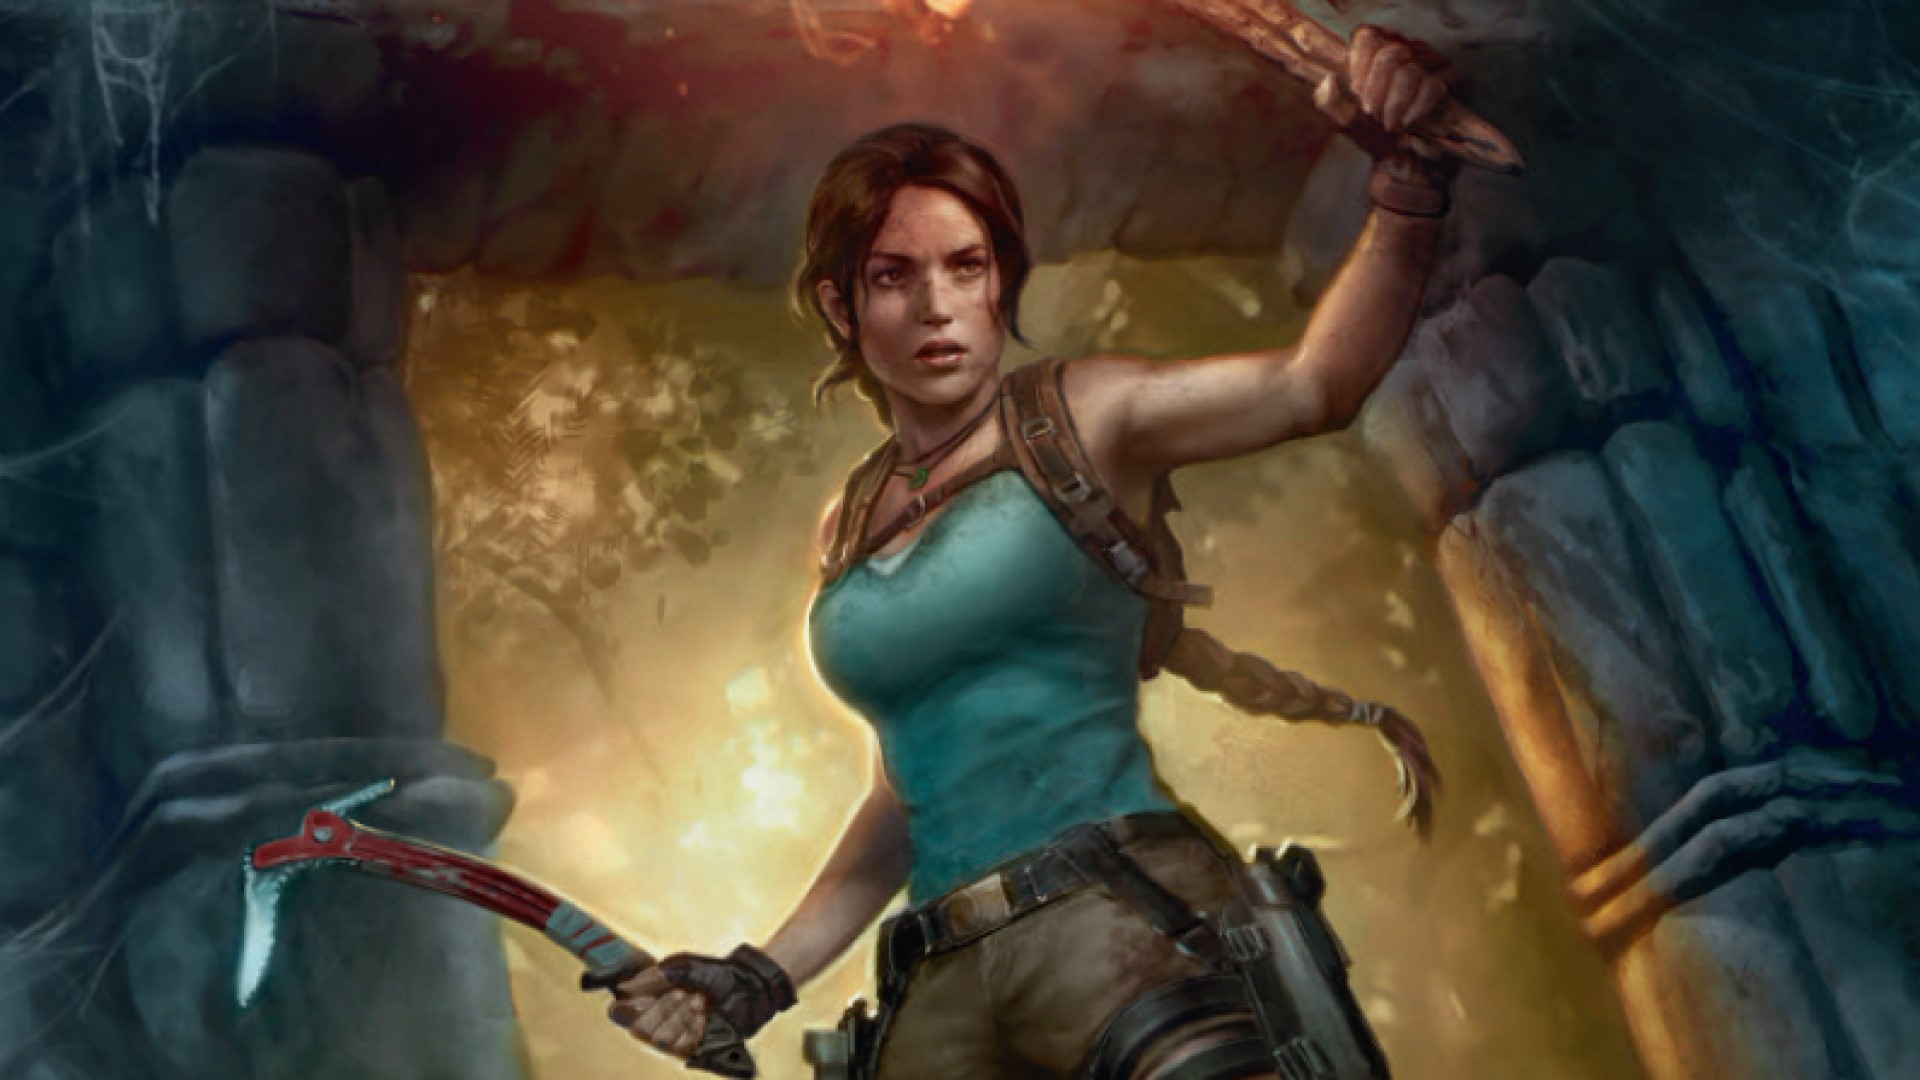 Tomb Raider Animated Series Announced by Netflix - MP1st